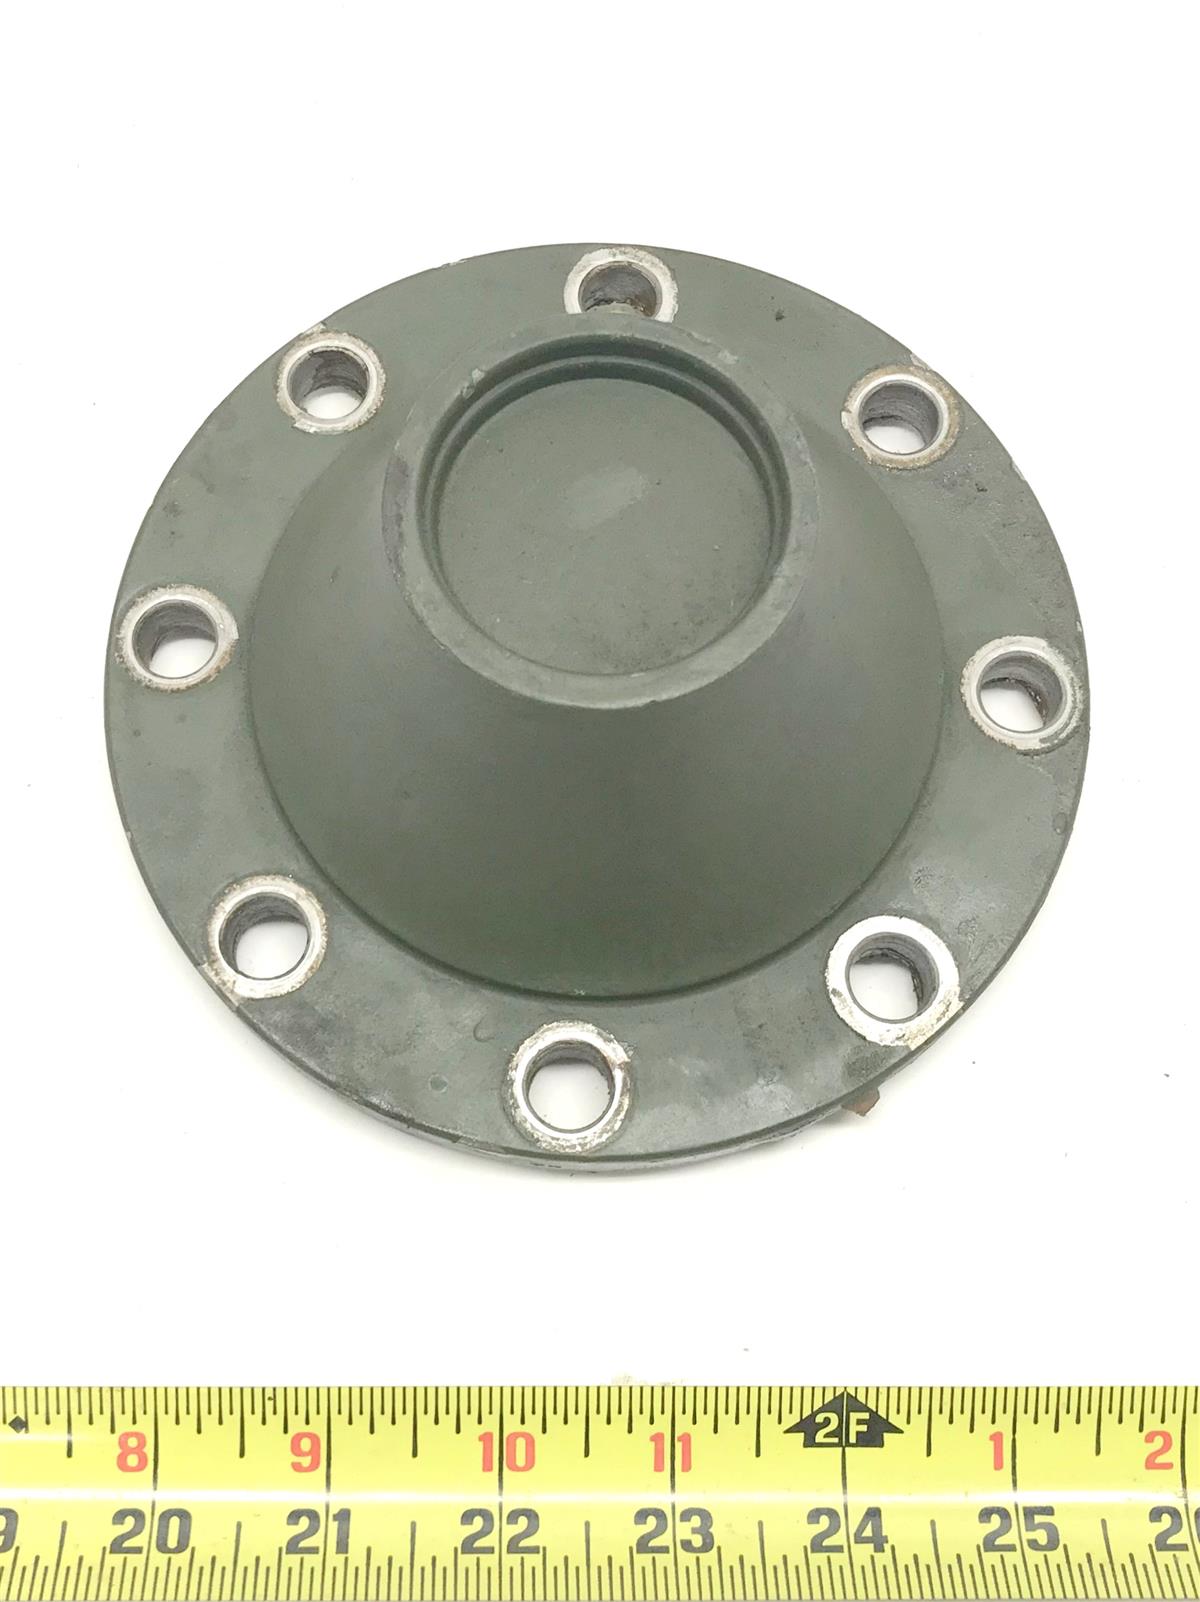 M35-719 | M35-719 M35 2.5 Ton Rockwell Front Axle Cap Cover (9).jpeg